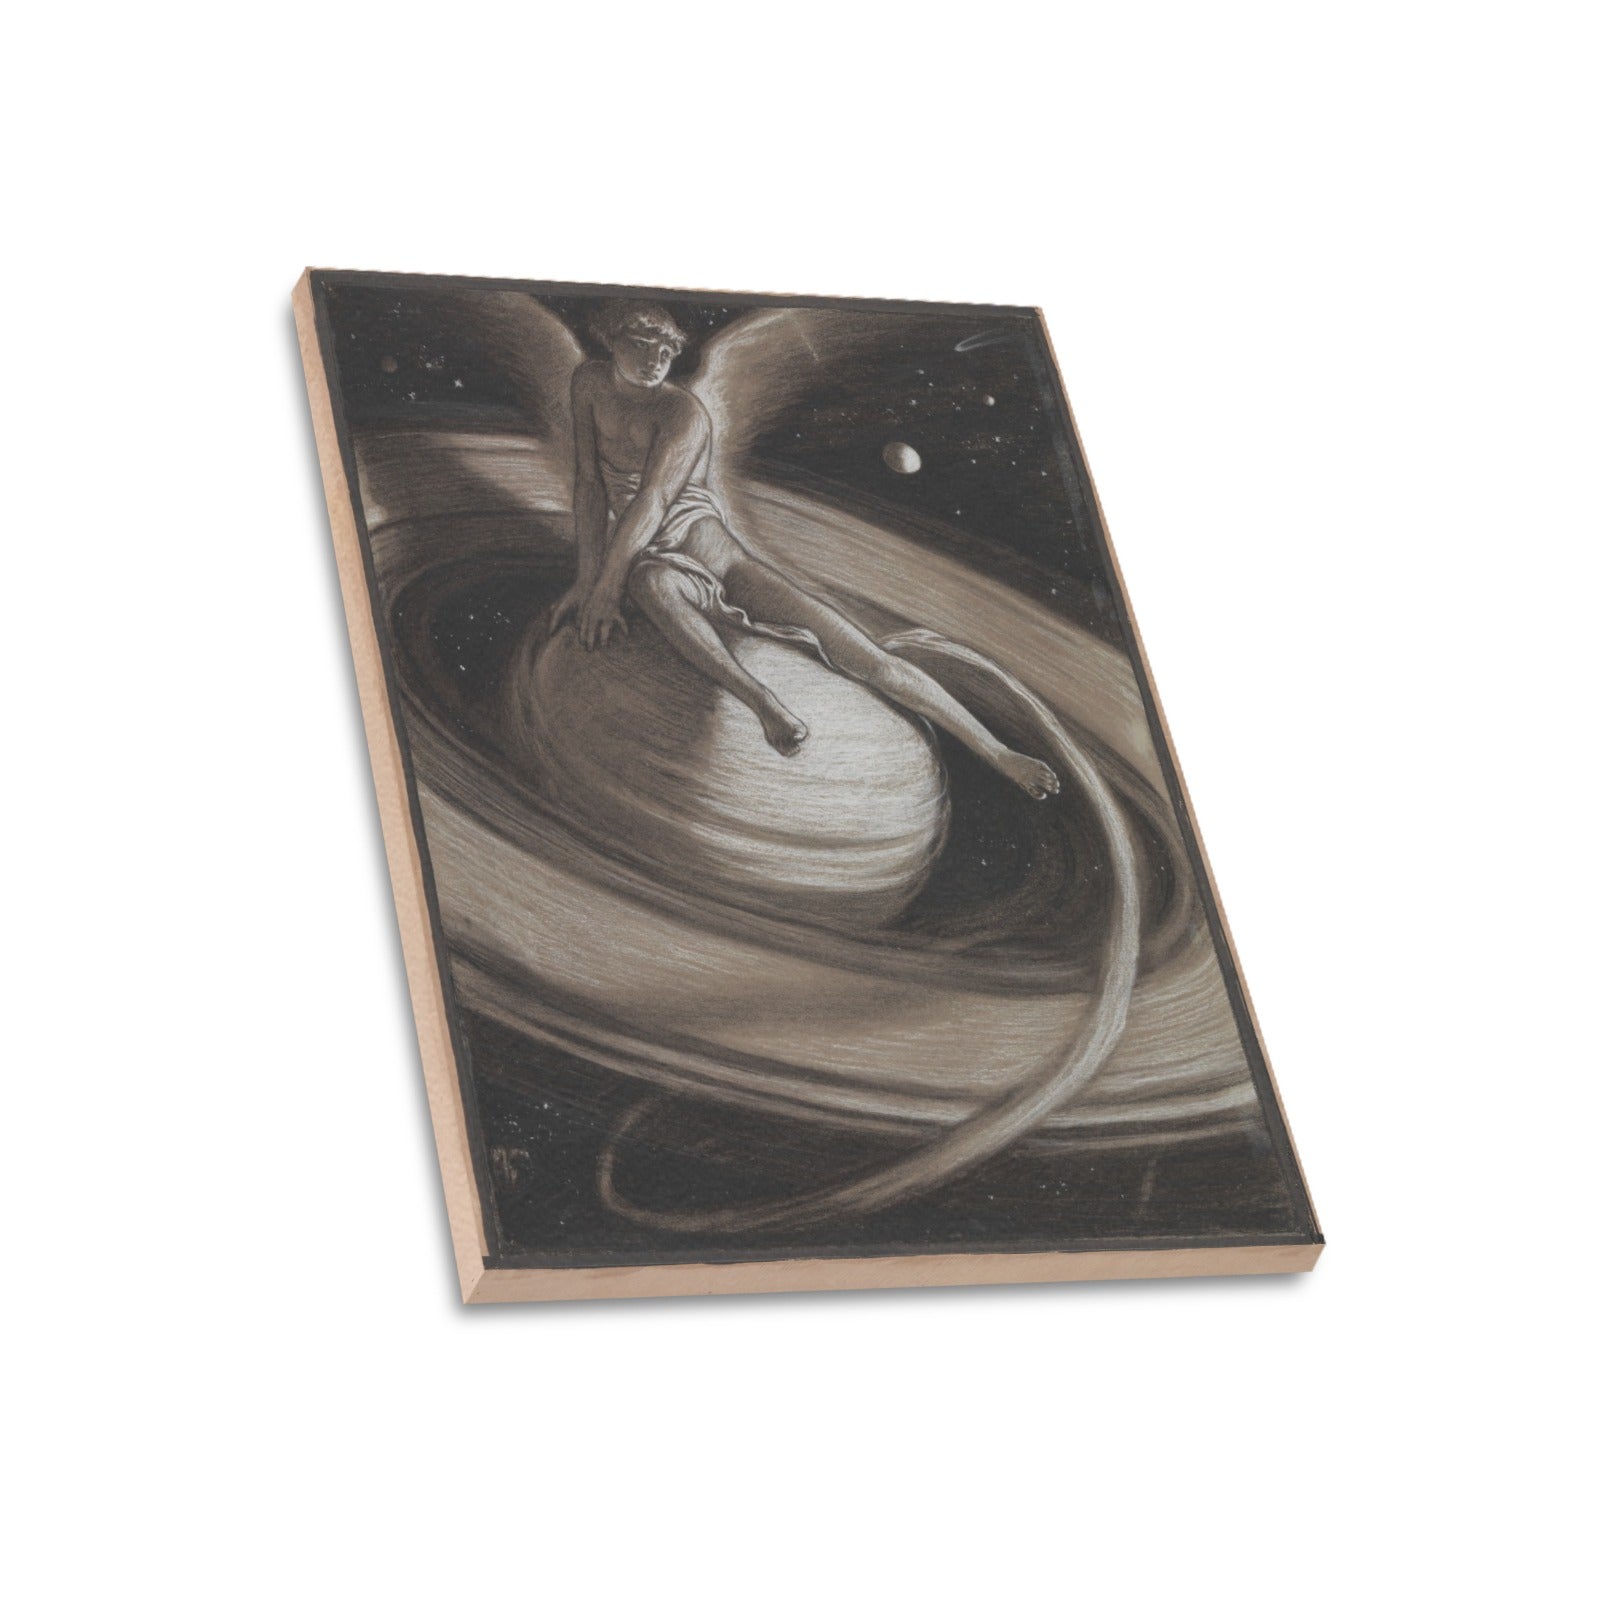 ELIHU VEDDER - THE THRONE OF SATURN - WRAPPED CANVAS PRINT 20" x 24"